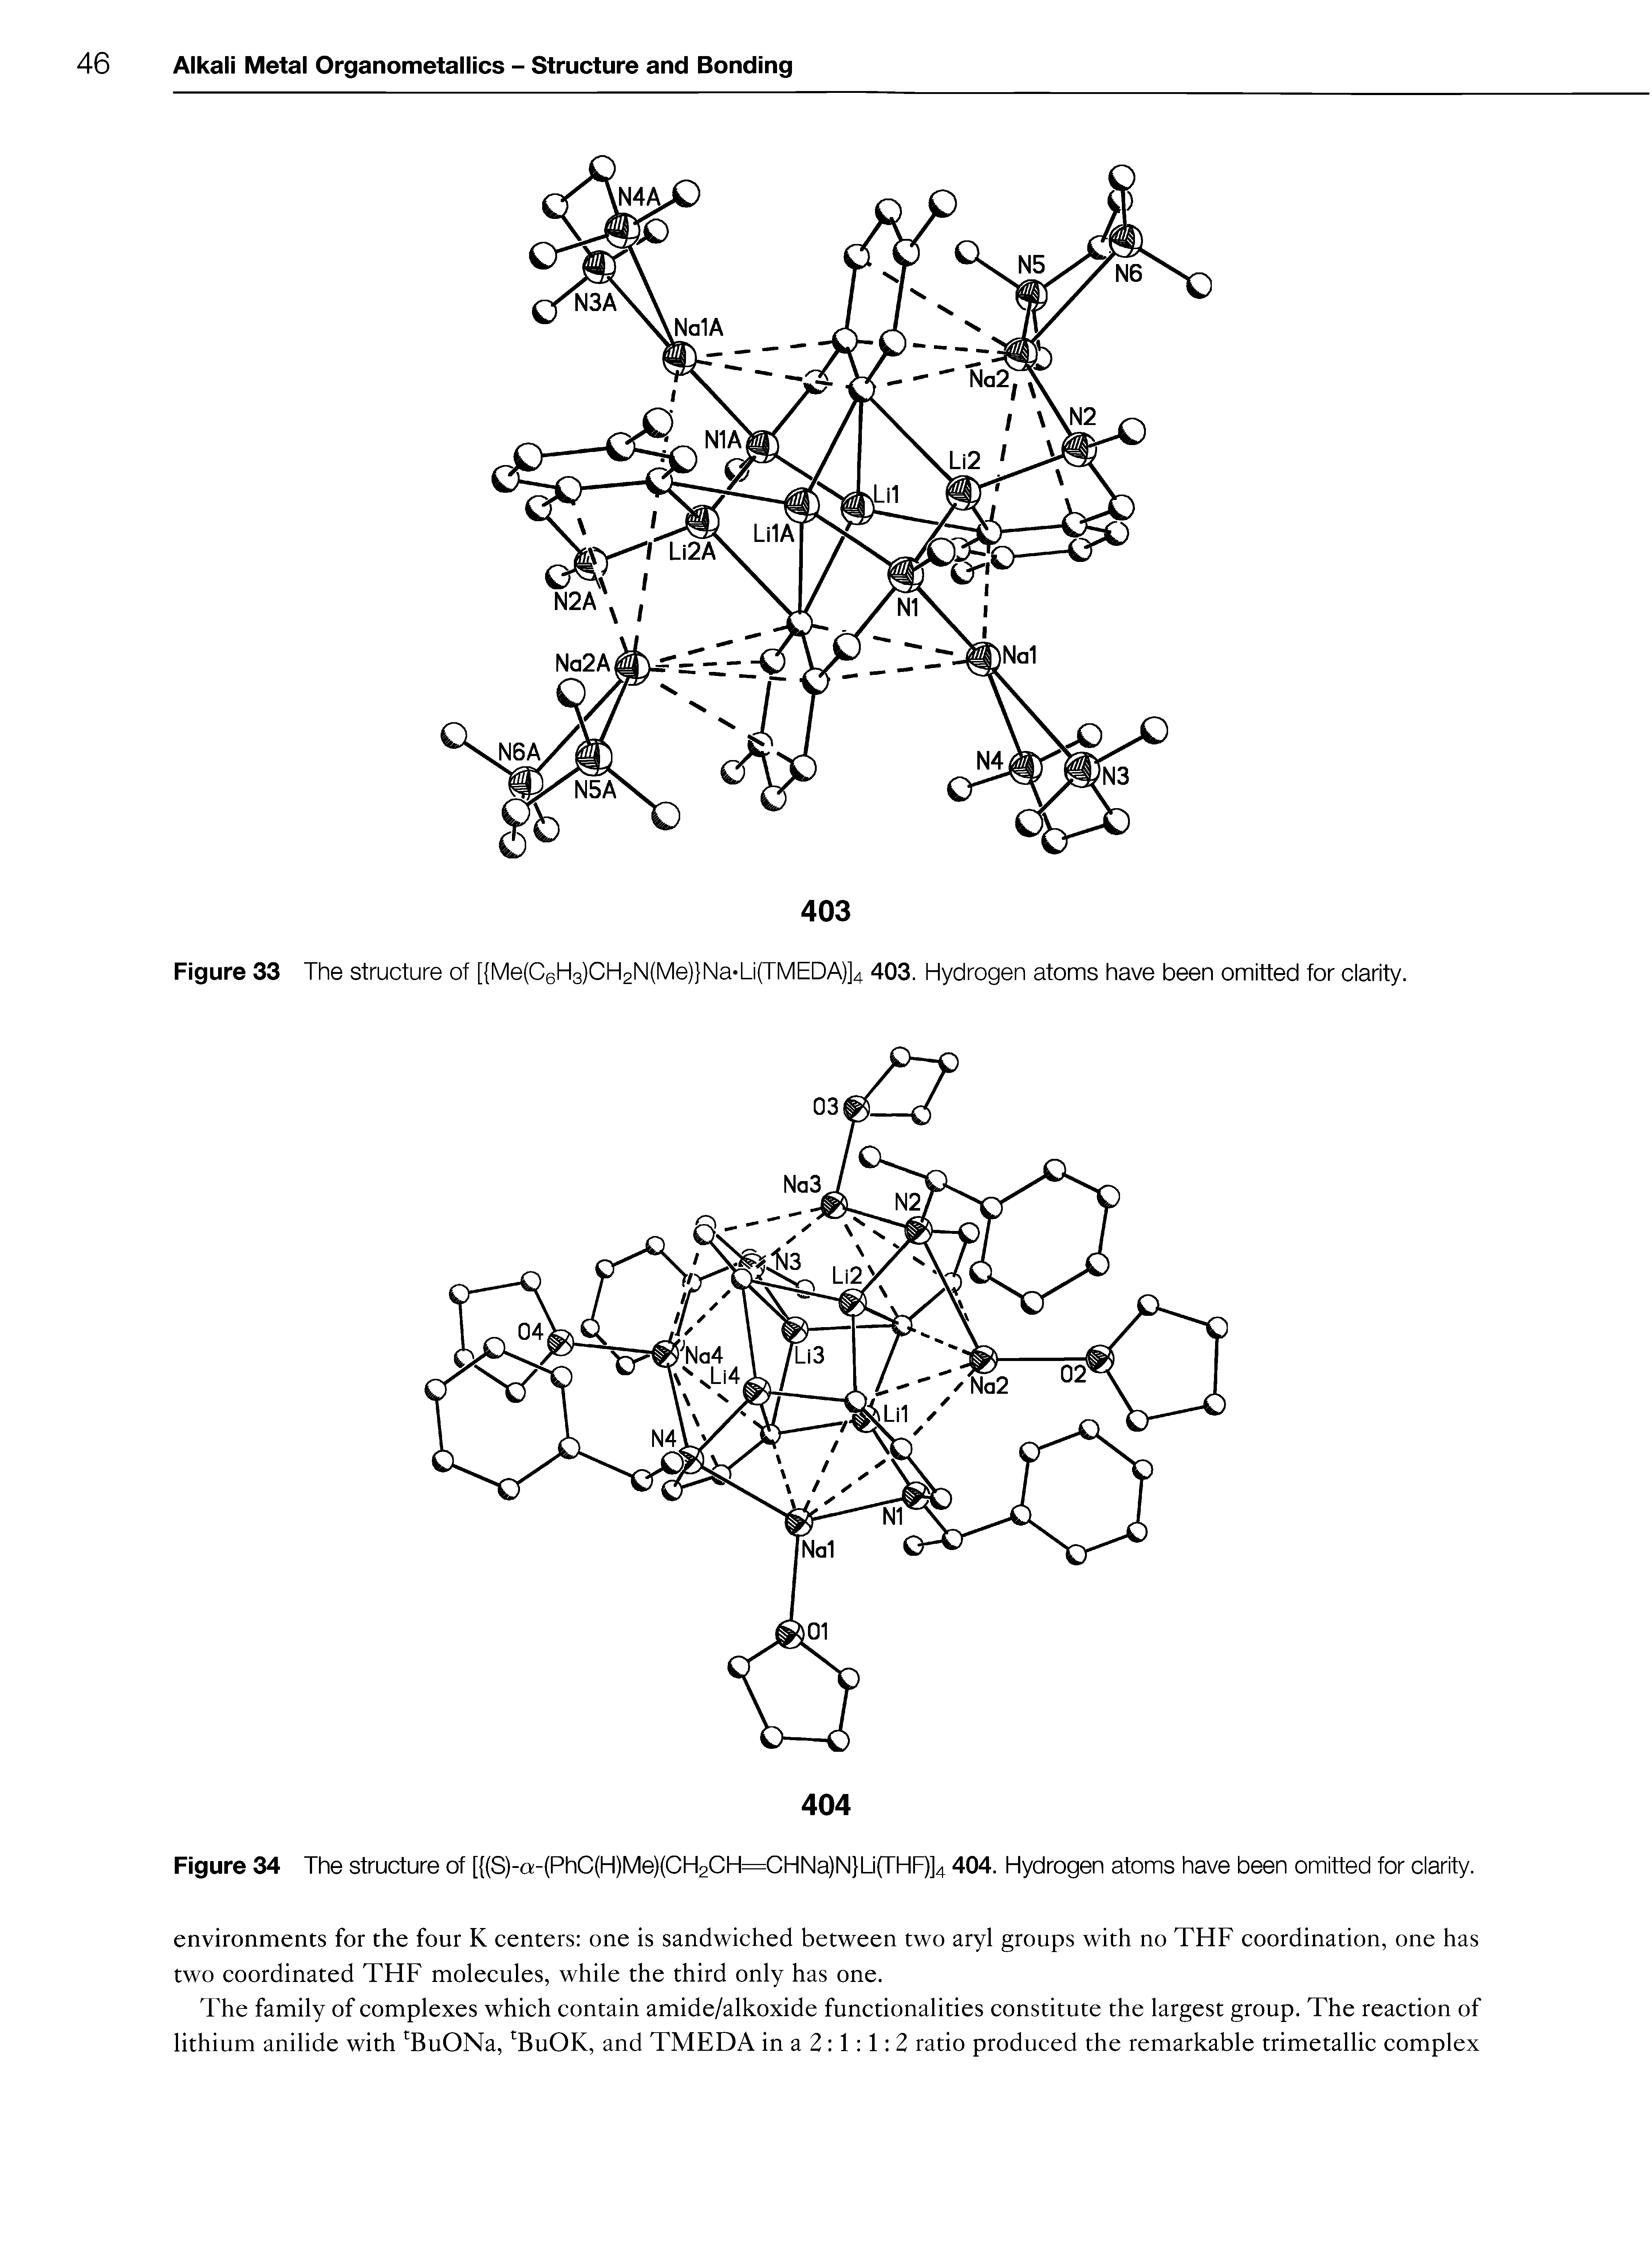 Figure 33 The structure of [ Me(C6H3)CH2N(Me) Na Li(TMEDA)]4 403. Hydrogen atoms have been omitted for clarity.